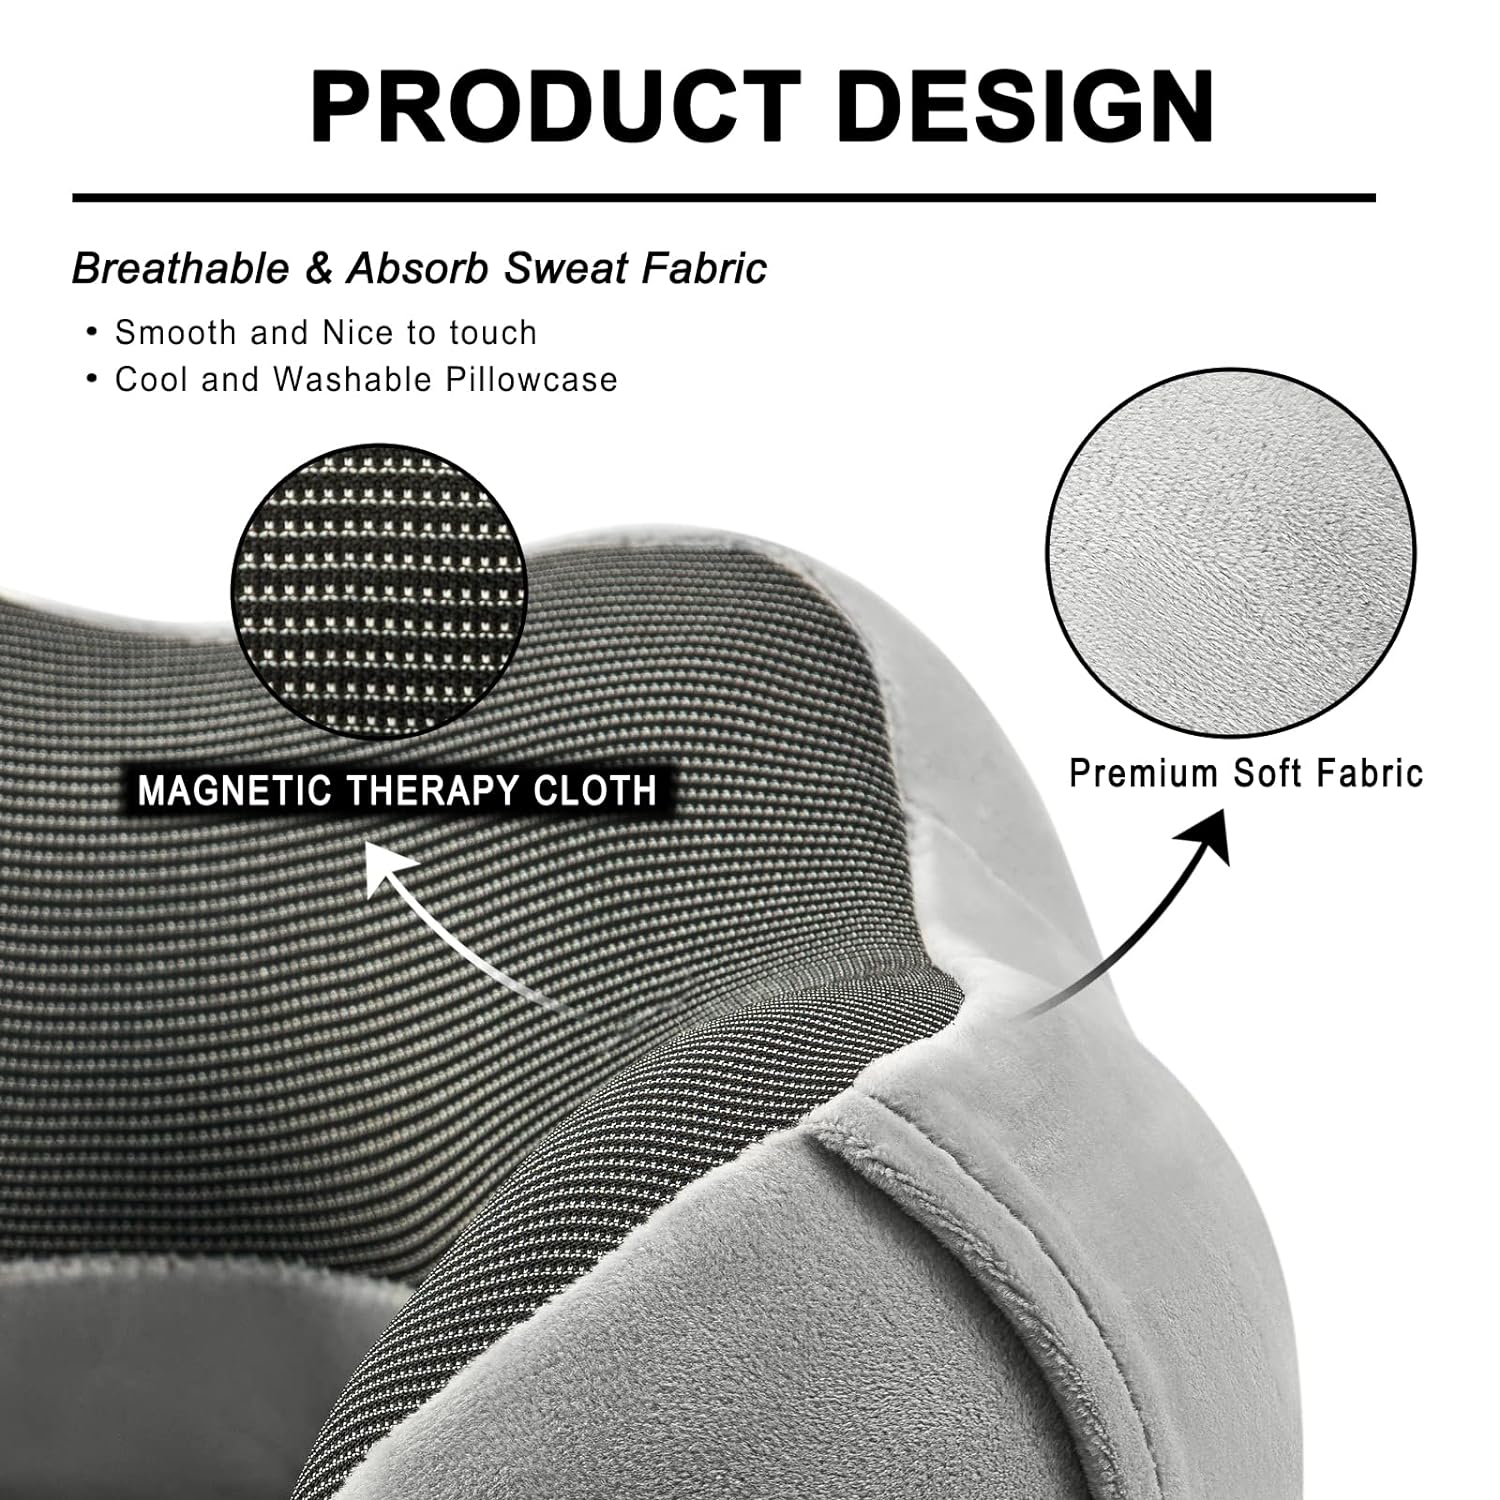 Travel Pillow for Airplane-2 Memory Foam Neck Pillow, Soft & Support Airplane Pillow for Travelling, Sleeping Rest, Car, Train, Office and Home Use (Grey+Blue)